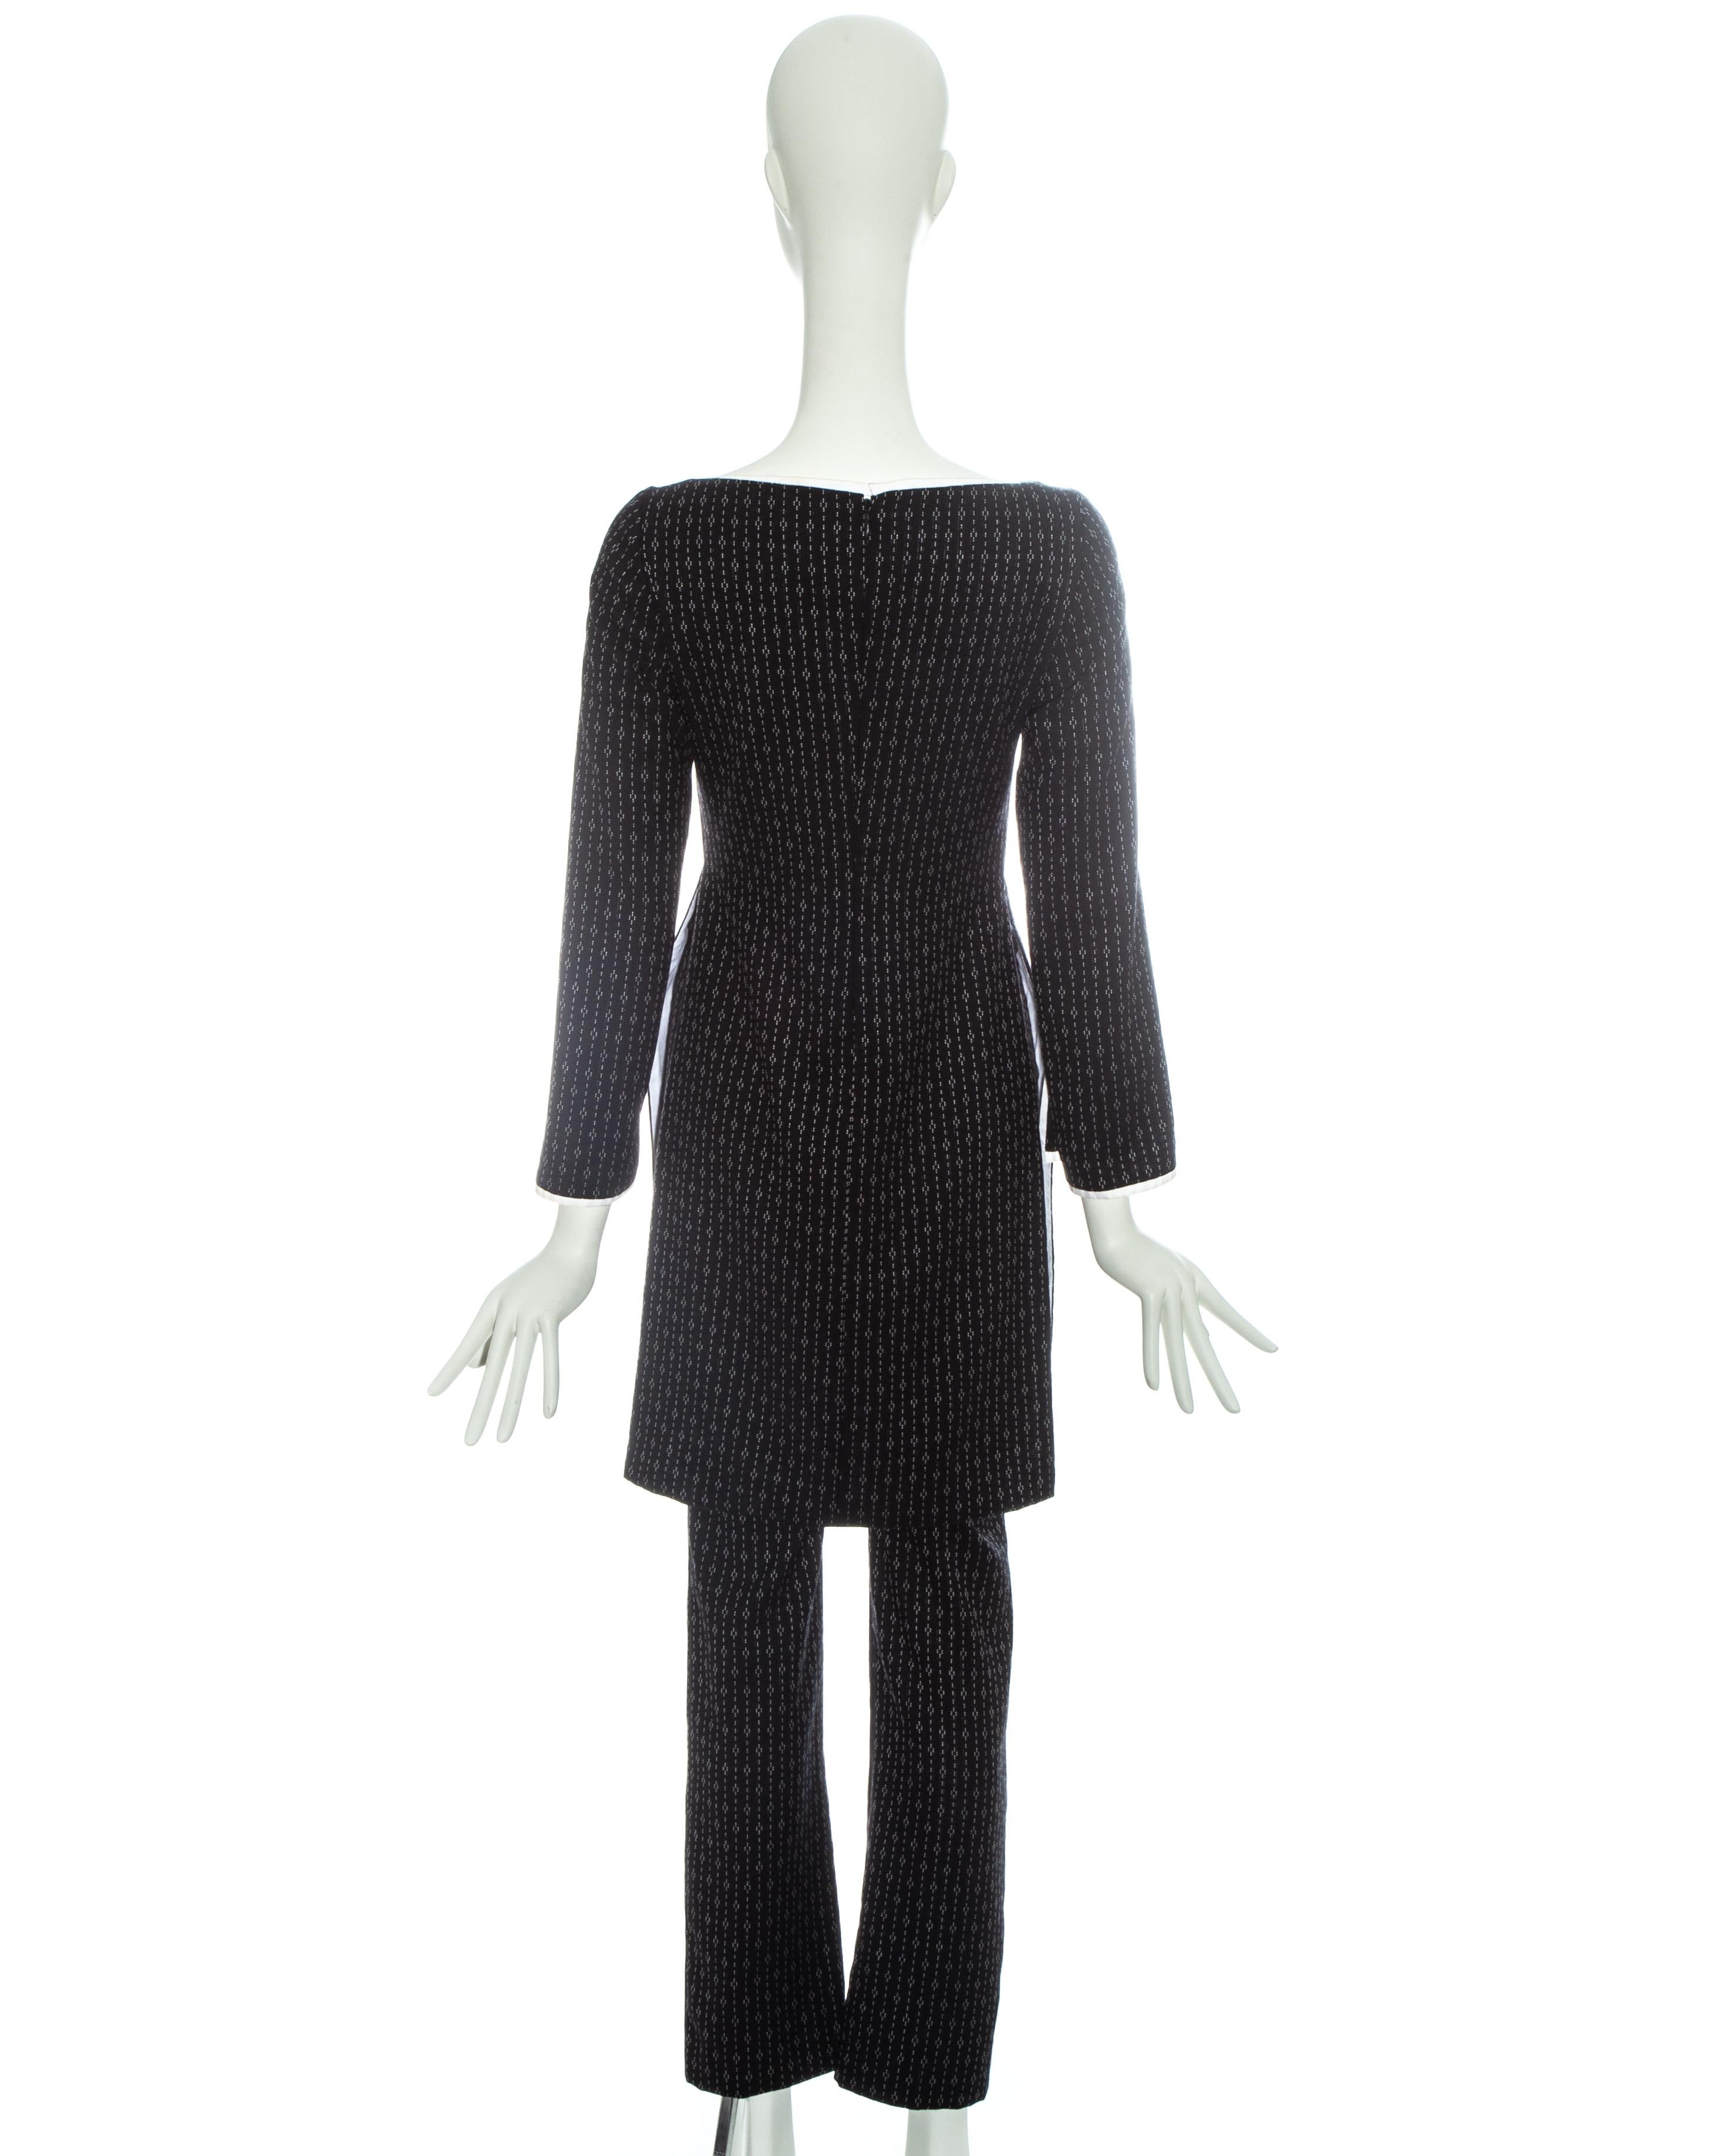 Gianni Versace black striped jacquard wool tunic and pants set, fw 1999 In Good Condition For Sale In London, GB